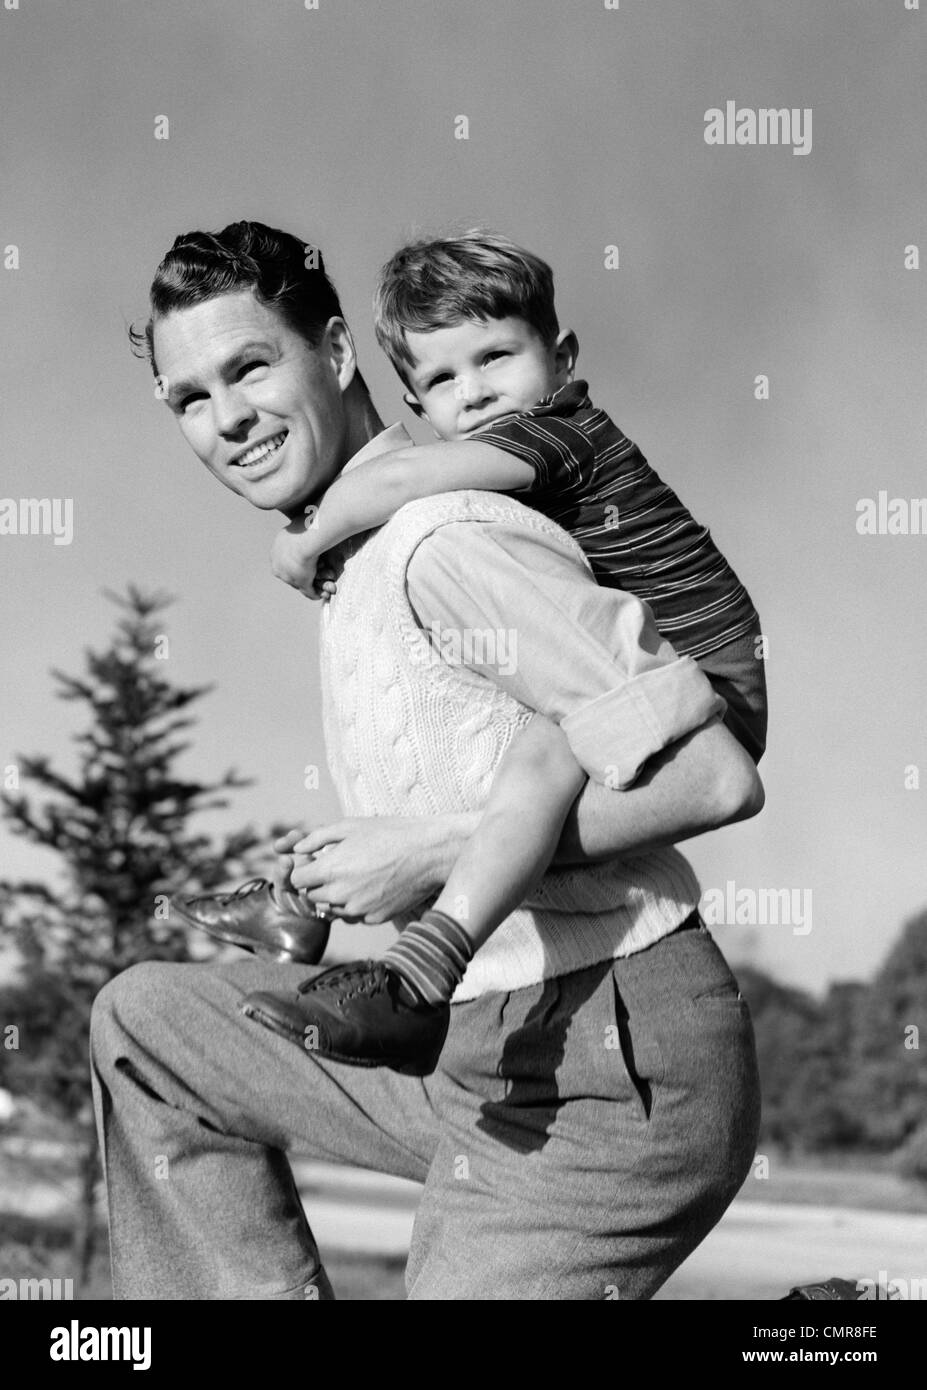 1940s SMILING FATHER CARRYING SON PIGGYBACK ON BACK Stock Photo